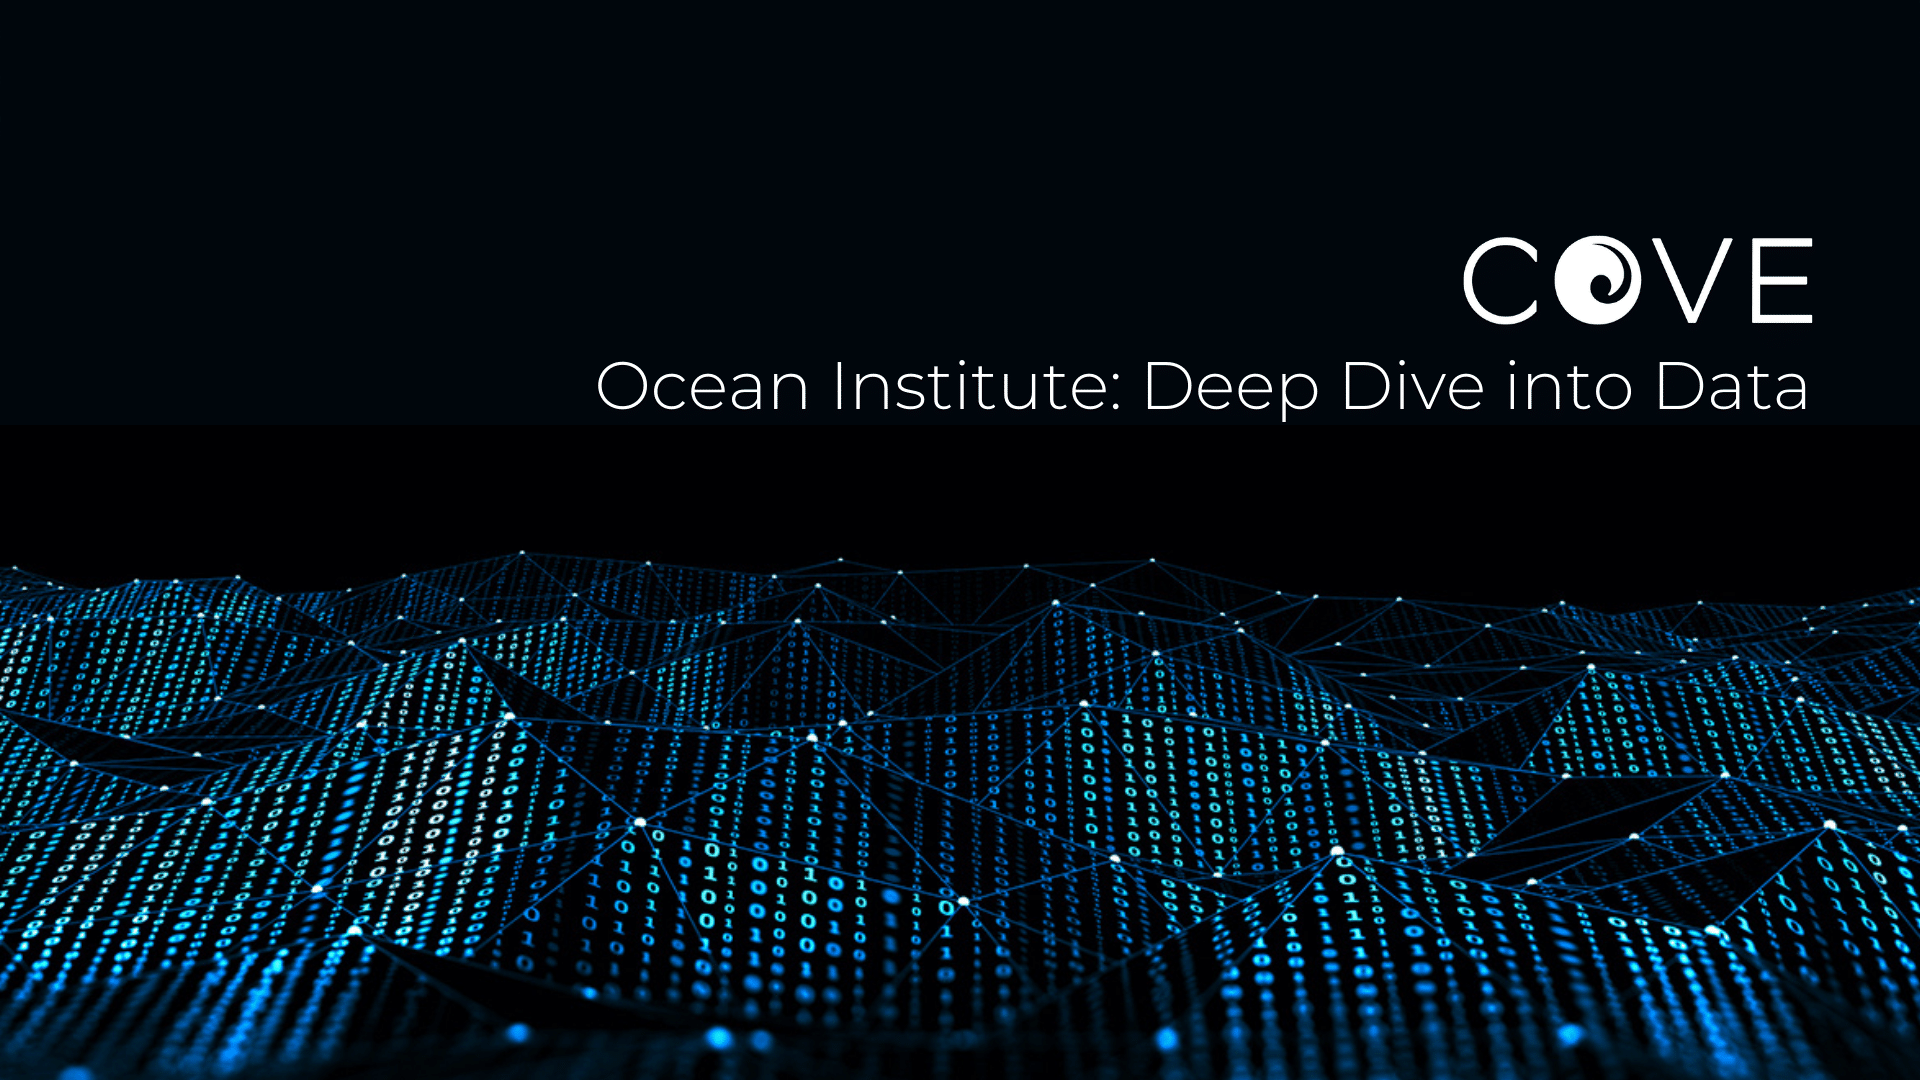 COVE’s Deep Dive into Data connects students with ocean data from coast to coast